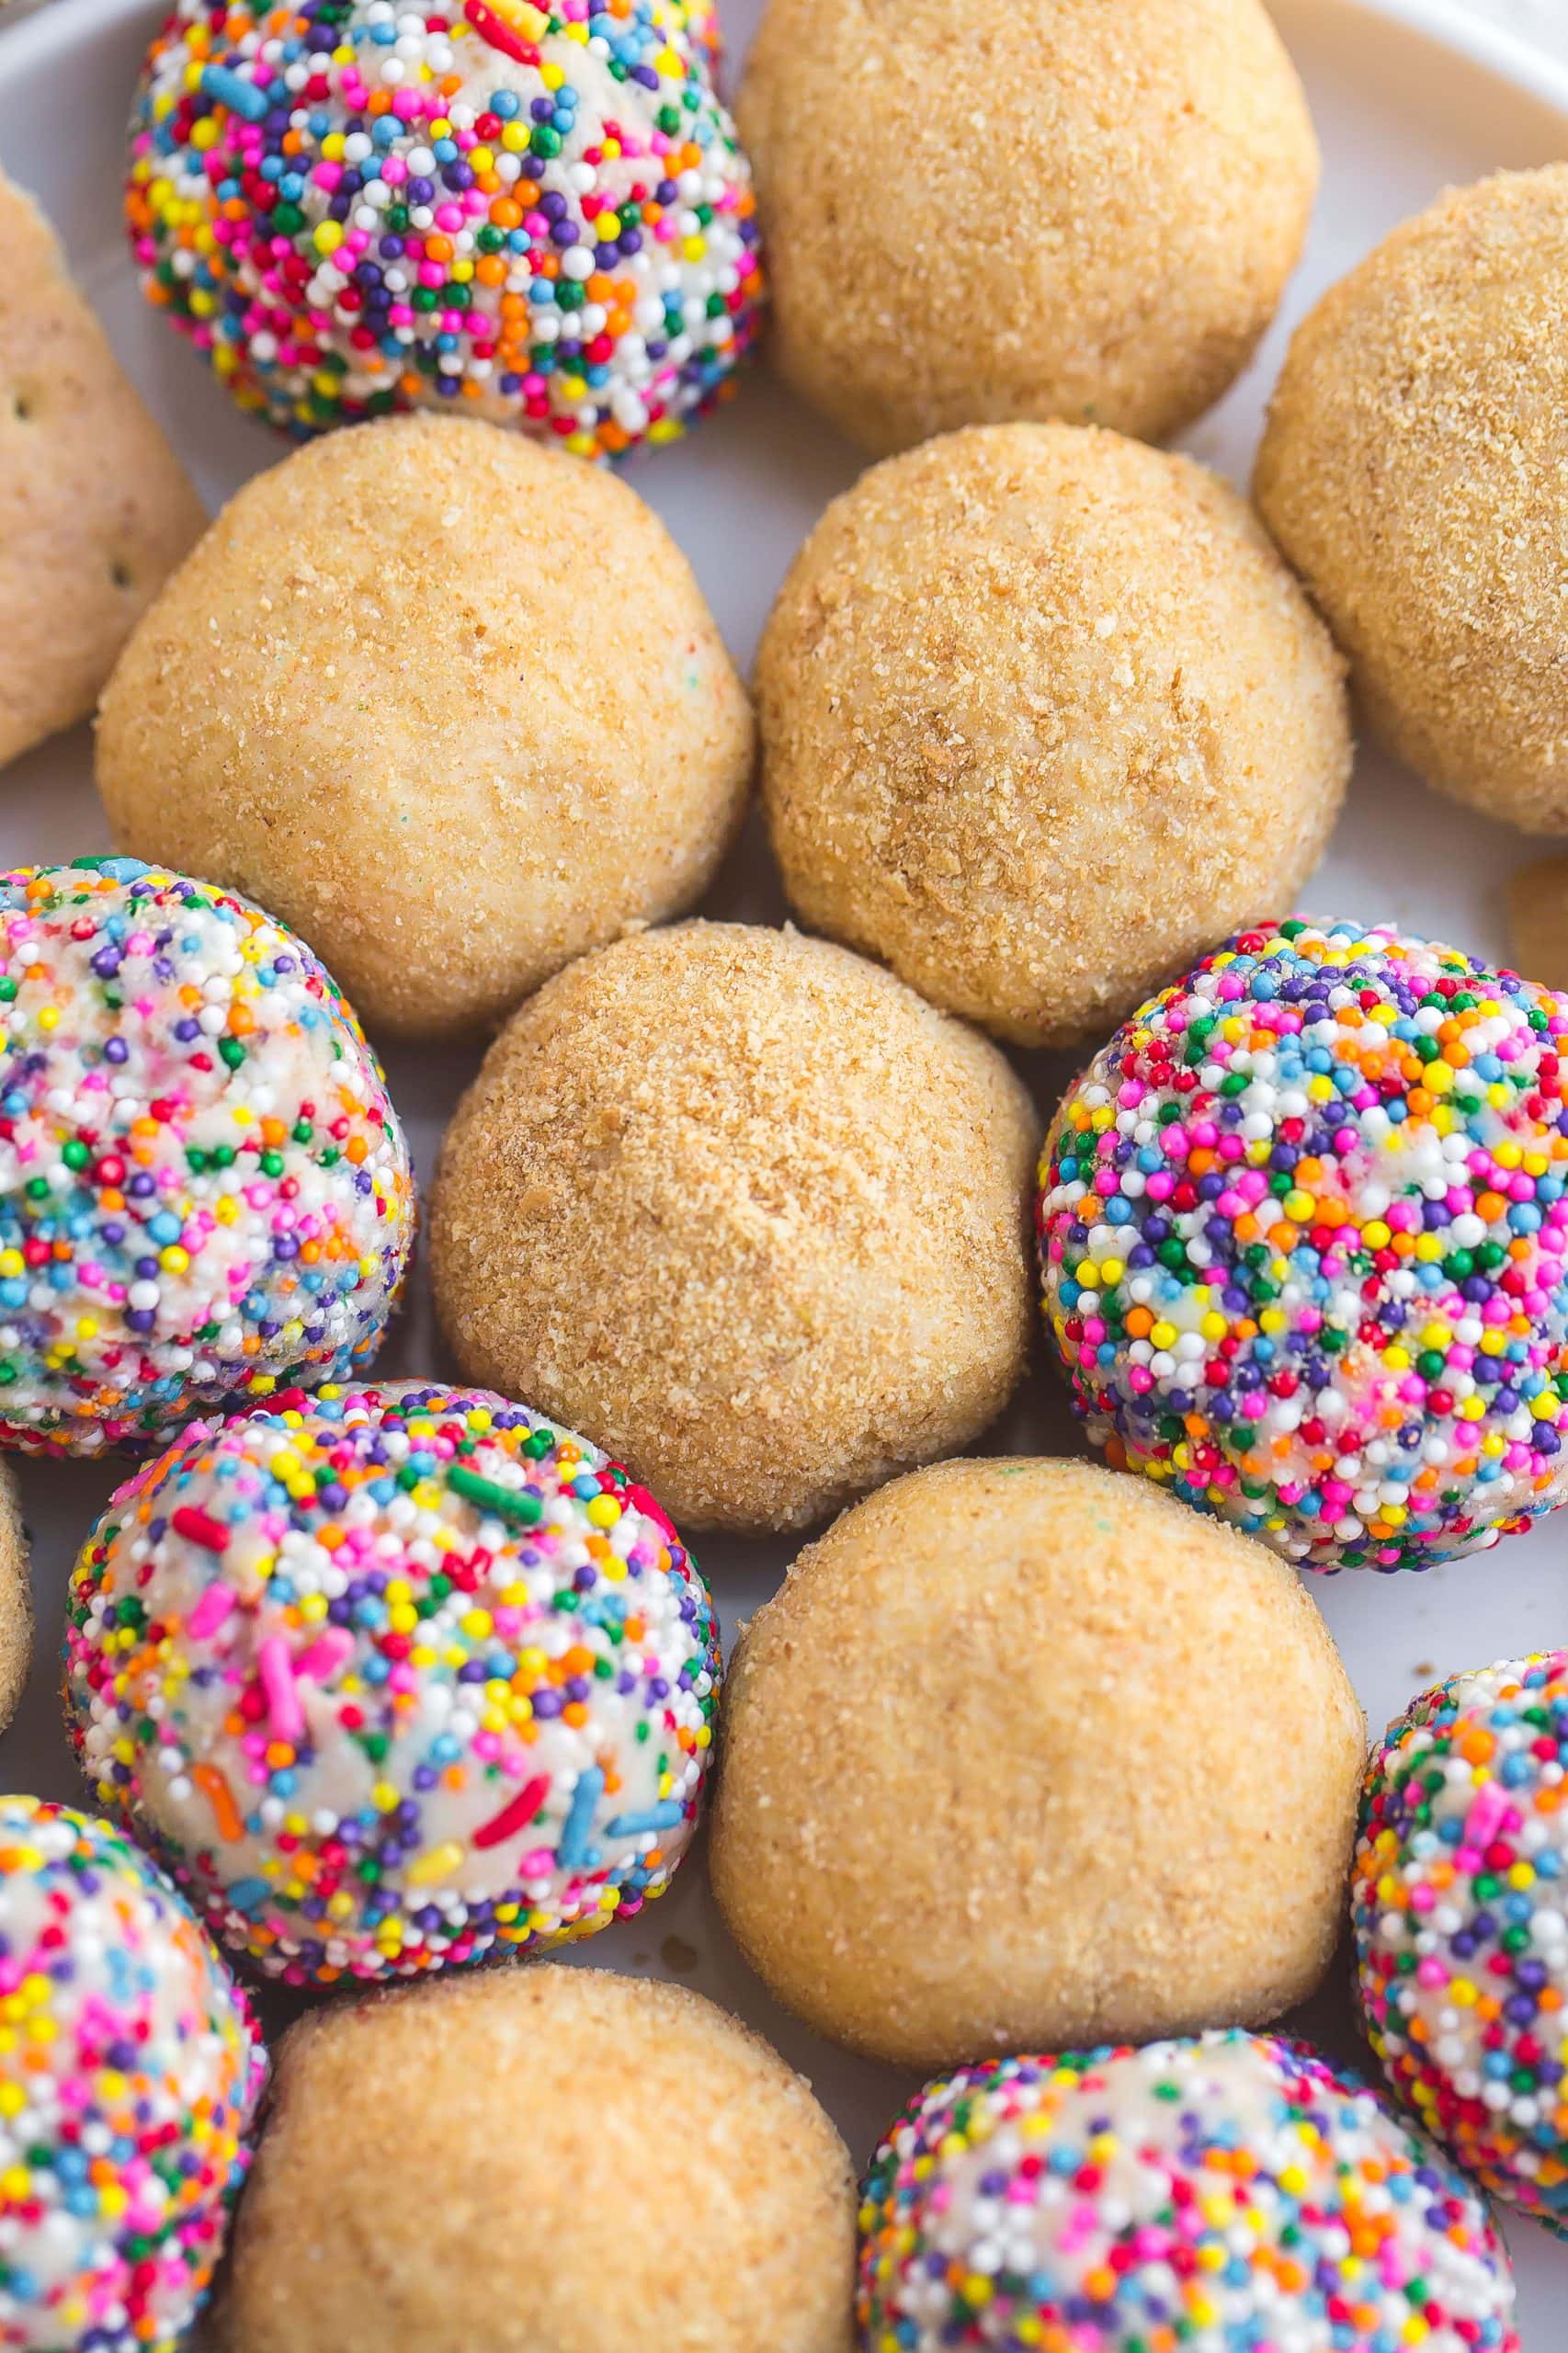 Platter of cheesecake balls coated in graham cracker crumbs and sprinkles.